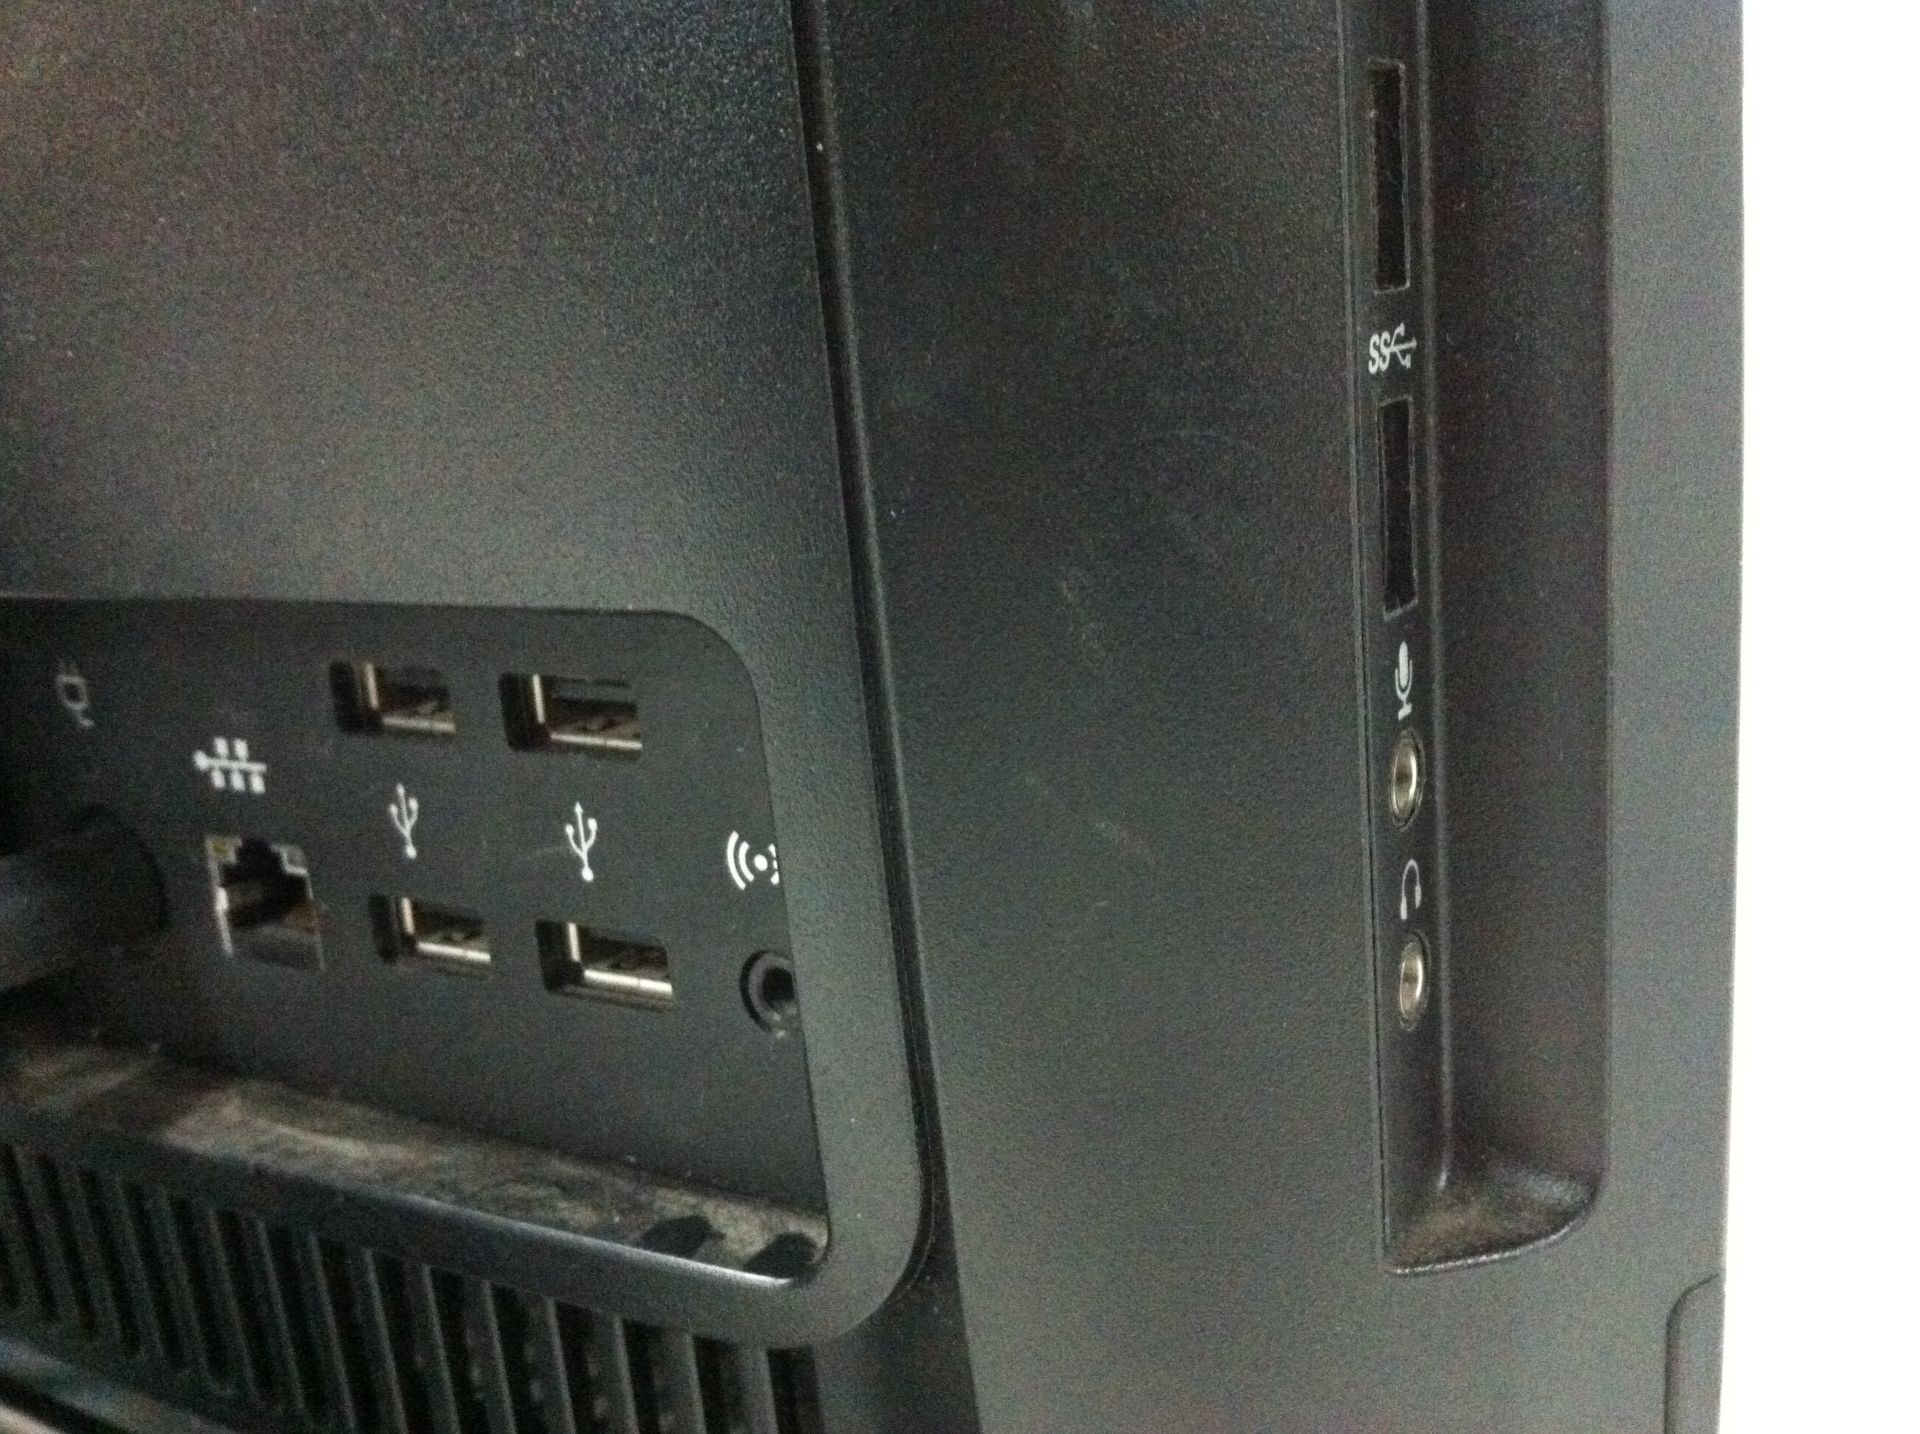 HP Pro 3520 All In One Business PC - Image 4 of 4